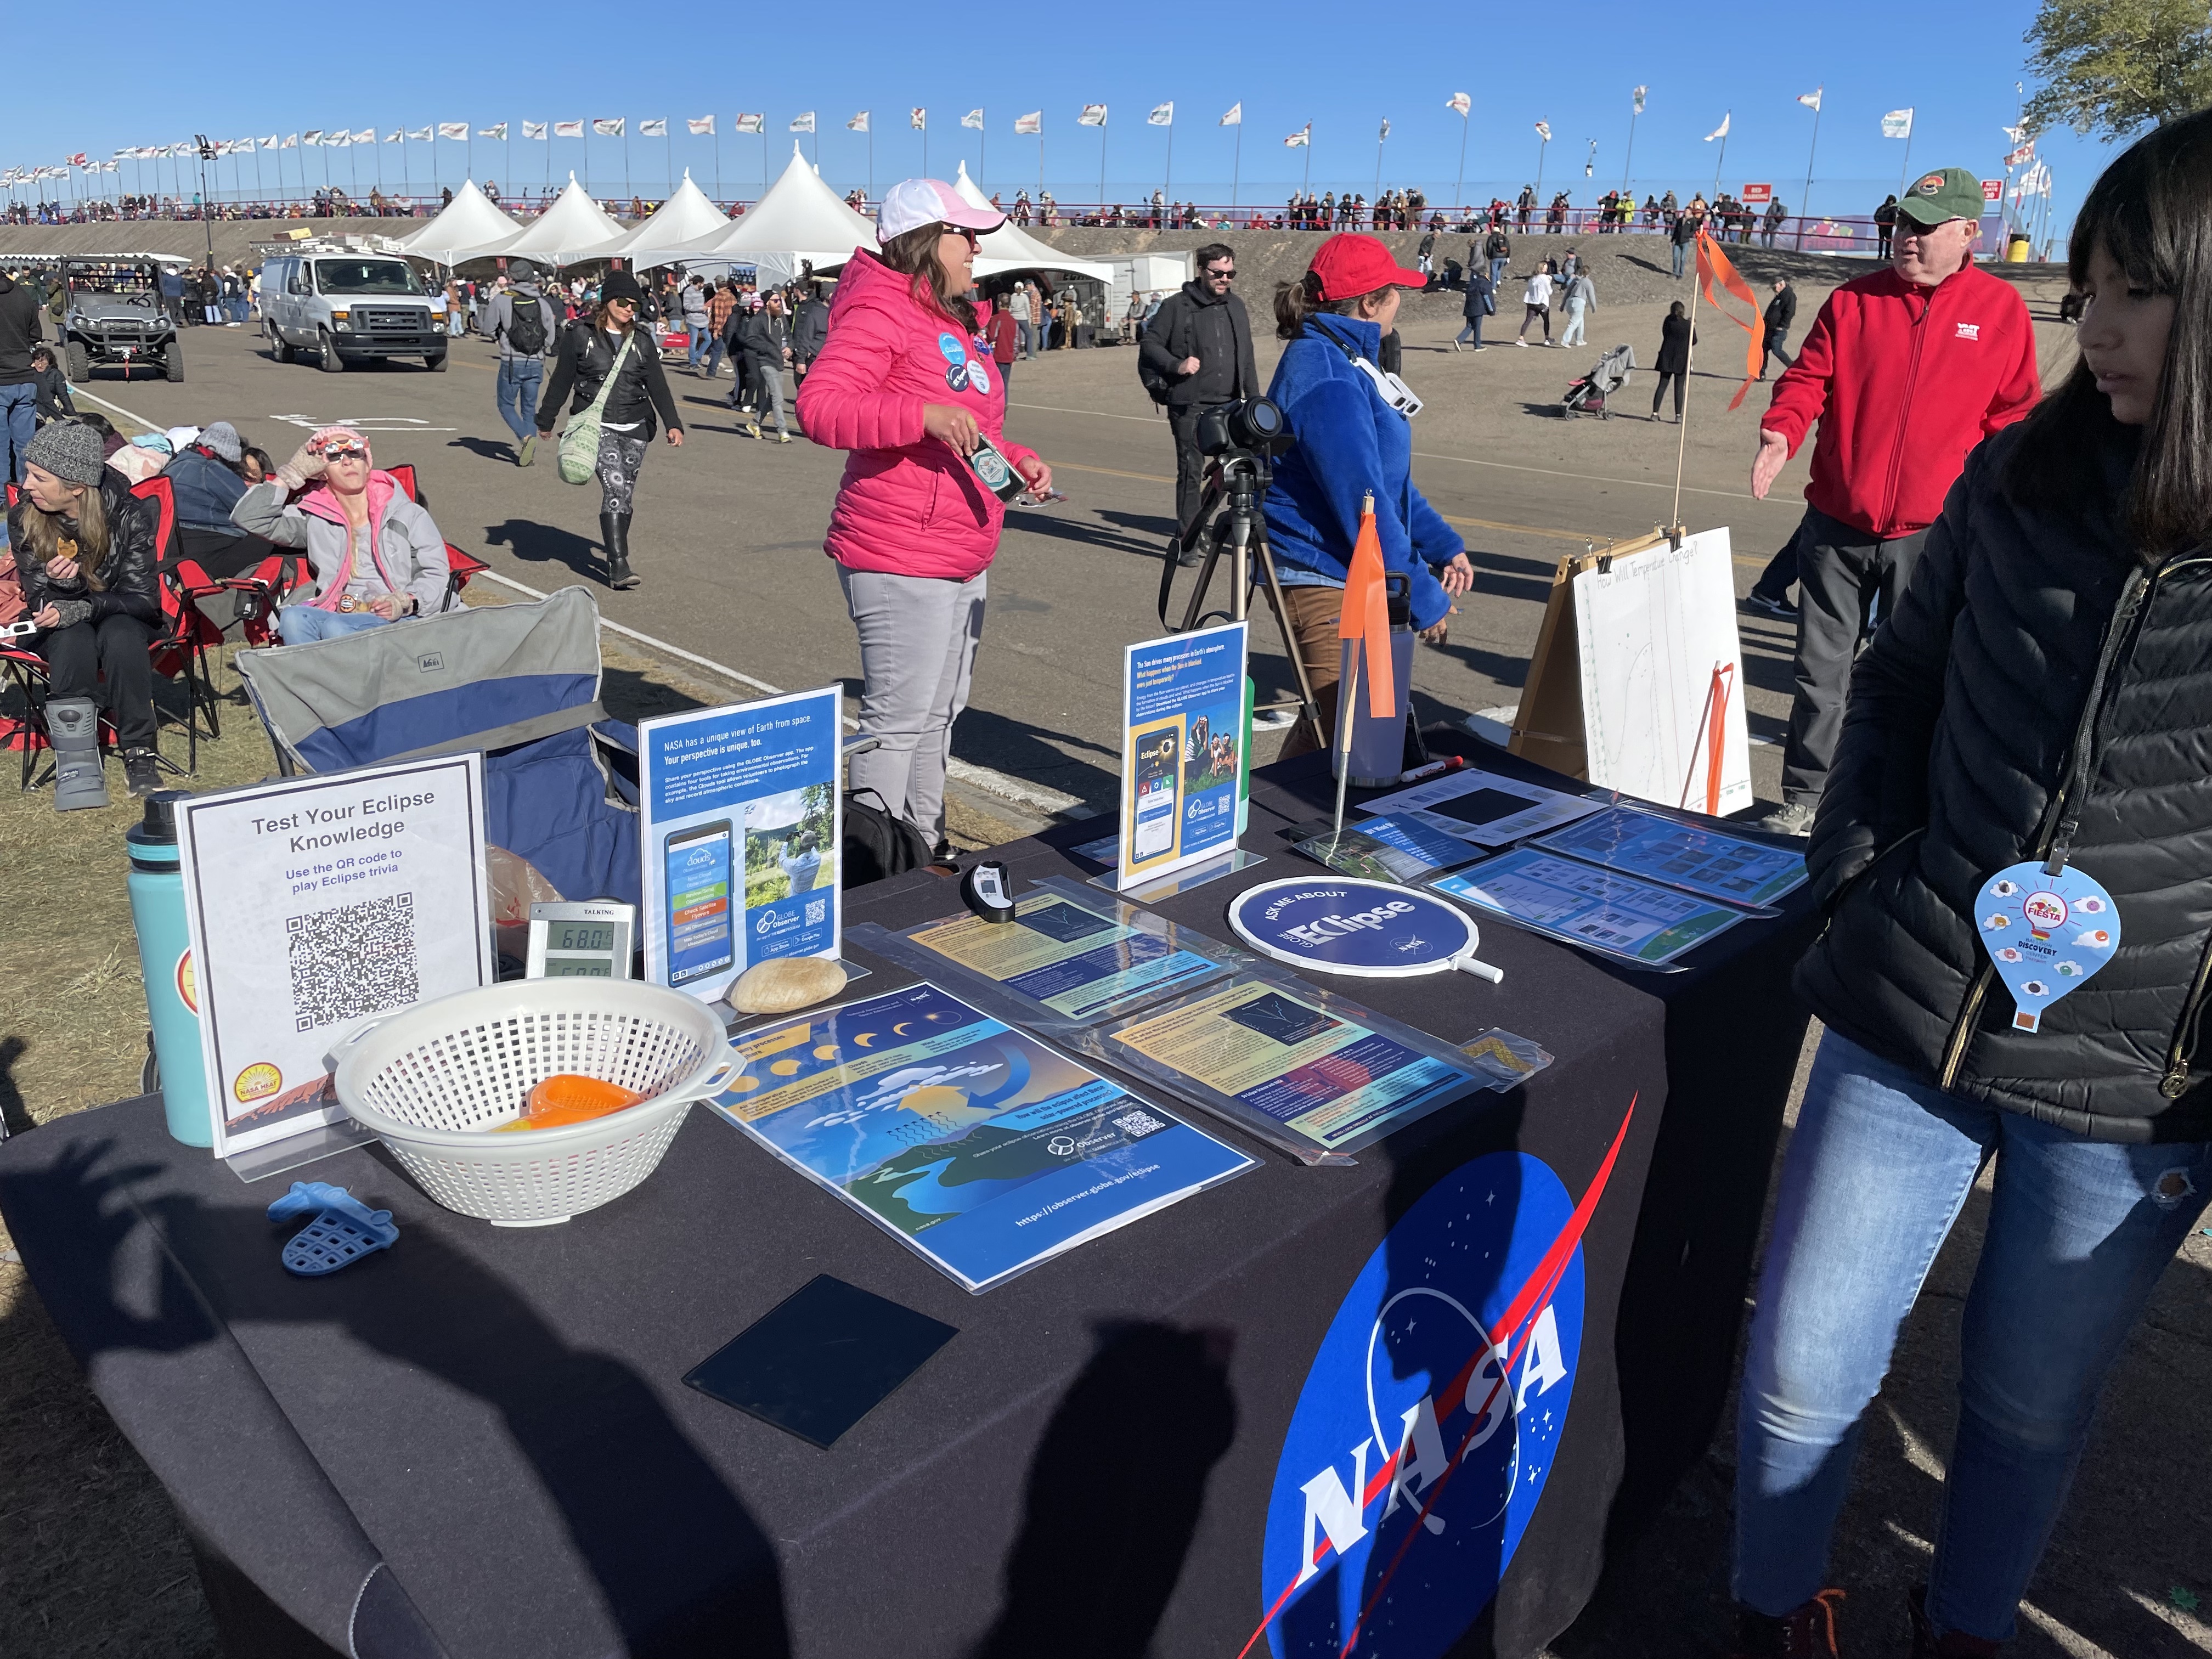 A tabletop display includes a colander and toys that have holes that cast shadows in the shape of the eclipse. The table also includes signs about GLOBE eclipse and clouds. Text on the signs is not legible. A woman is looking at the table while people in the background are watching the eclipse through solar viewing glasses. 